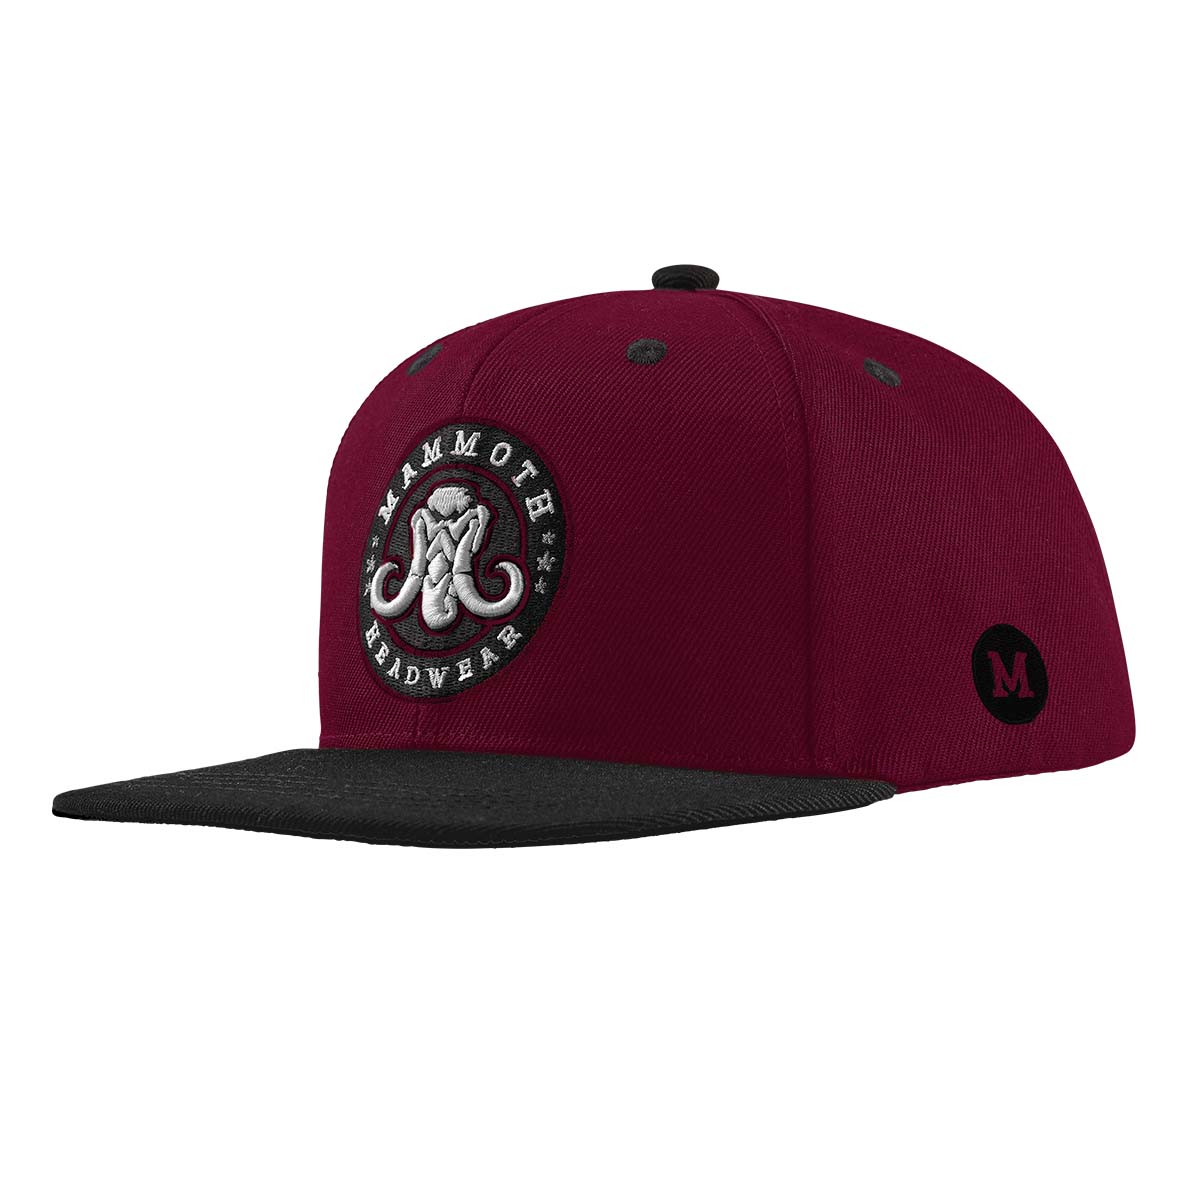 Classic Maroon Snapback: Timeless Style Meets Comfort